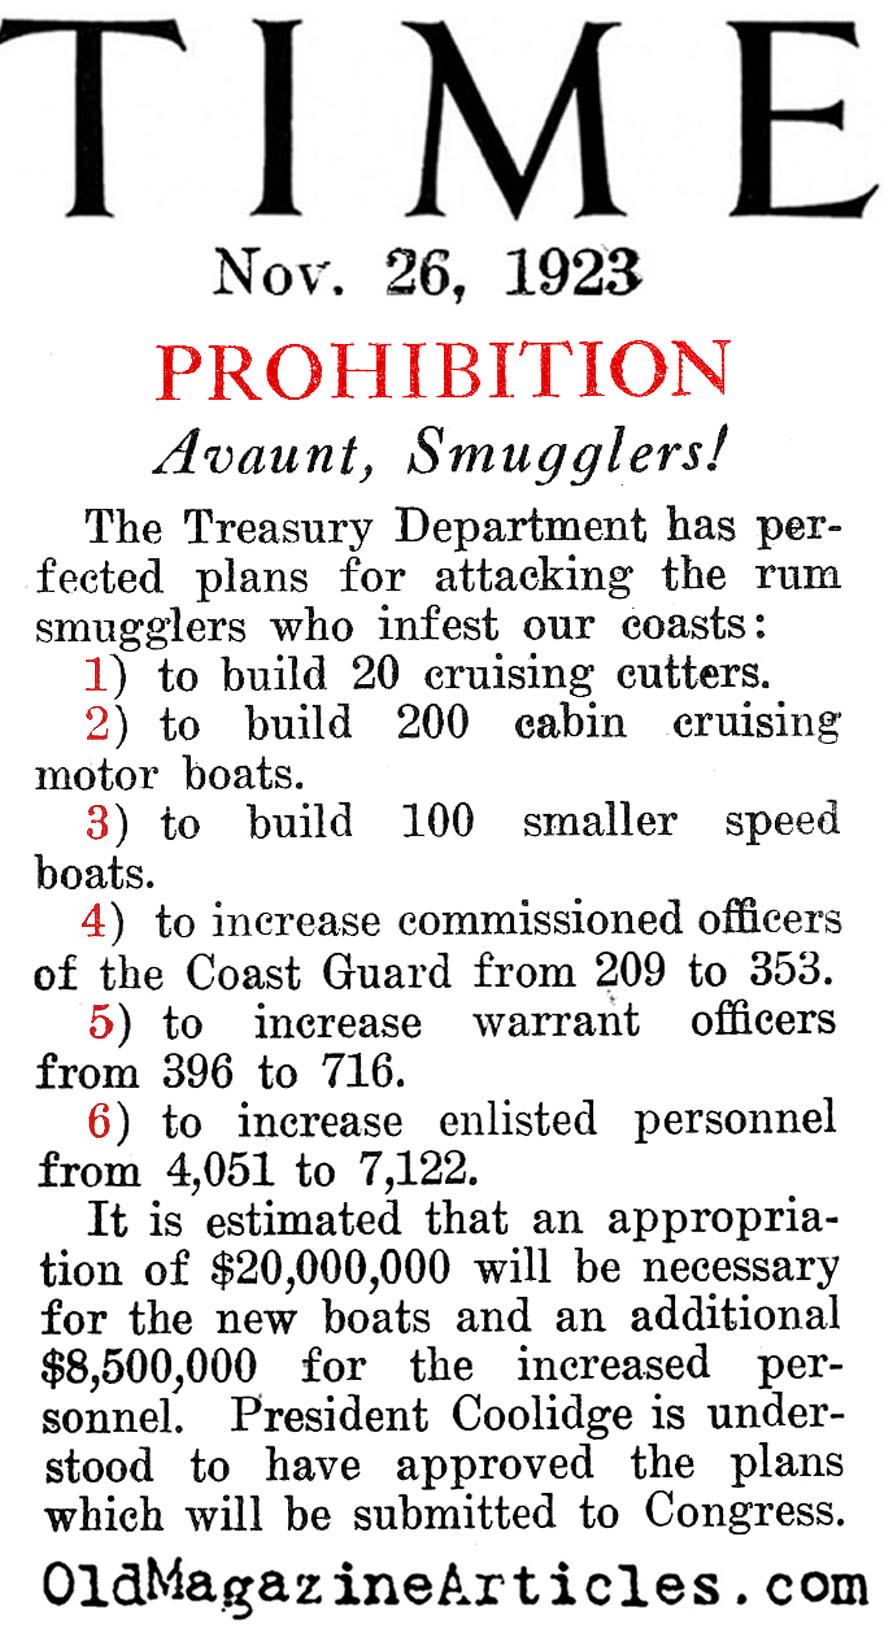 The Treasury Department Steps Up (Time Magazine, 1923)